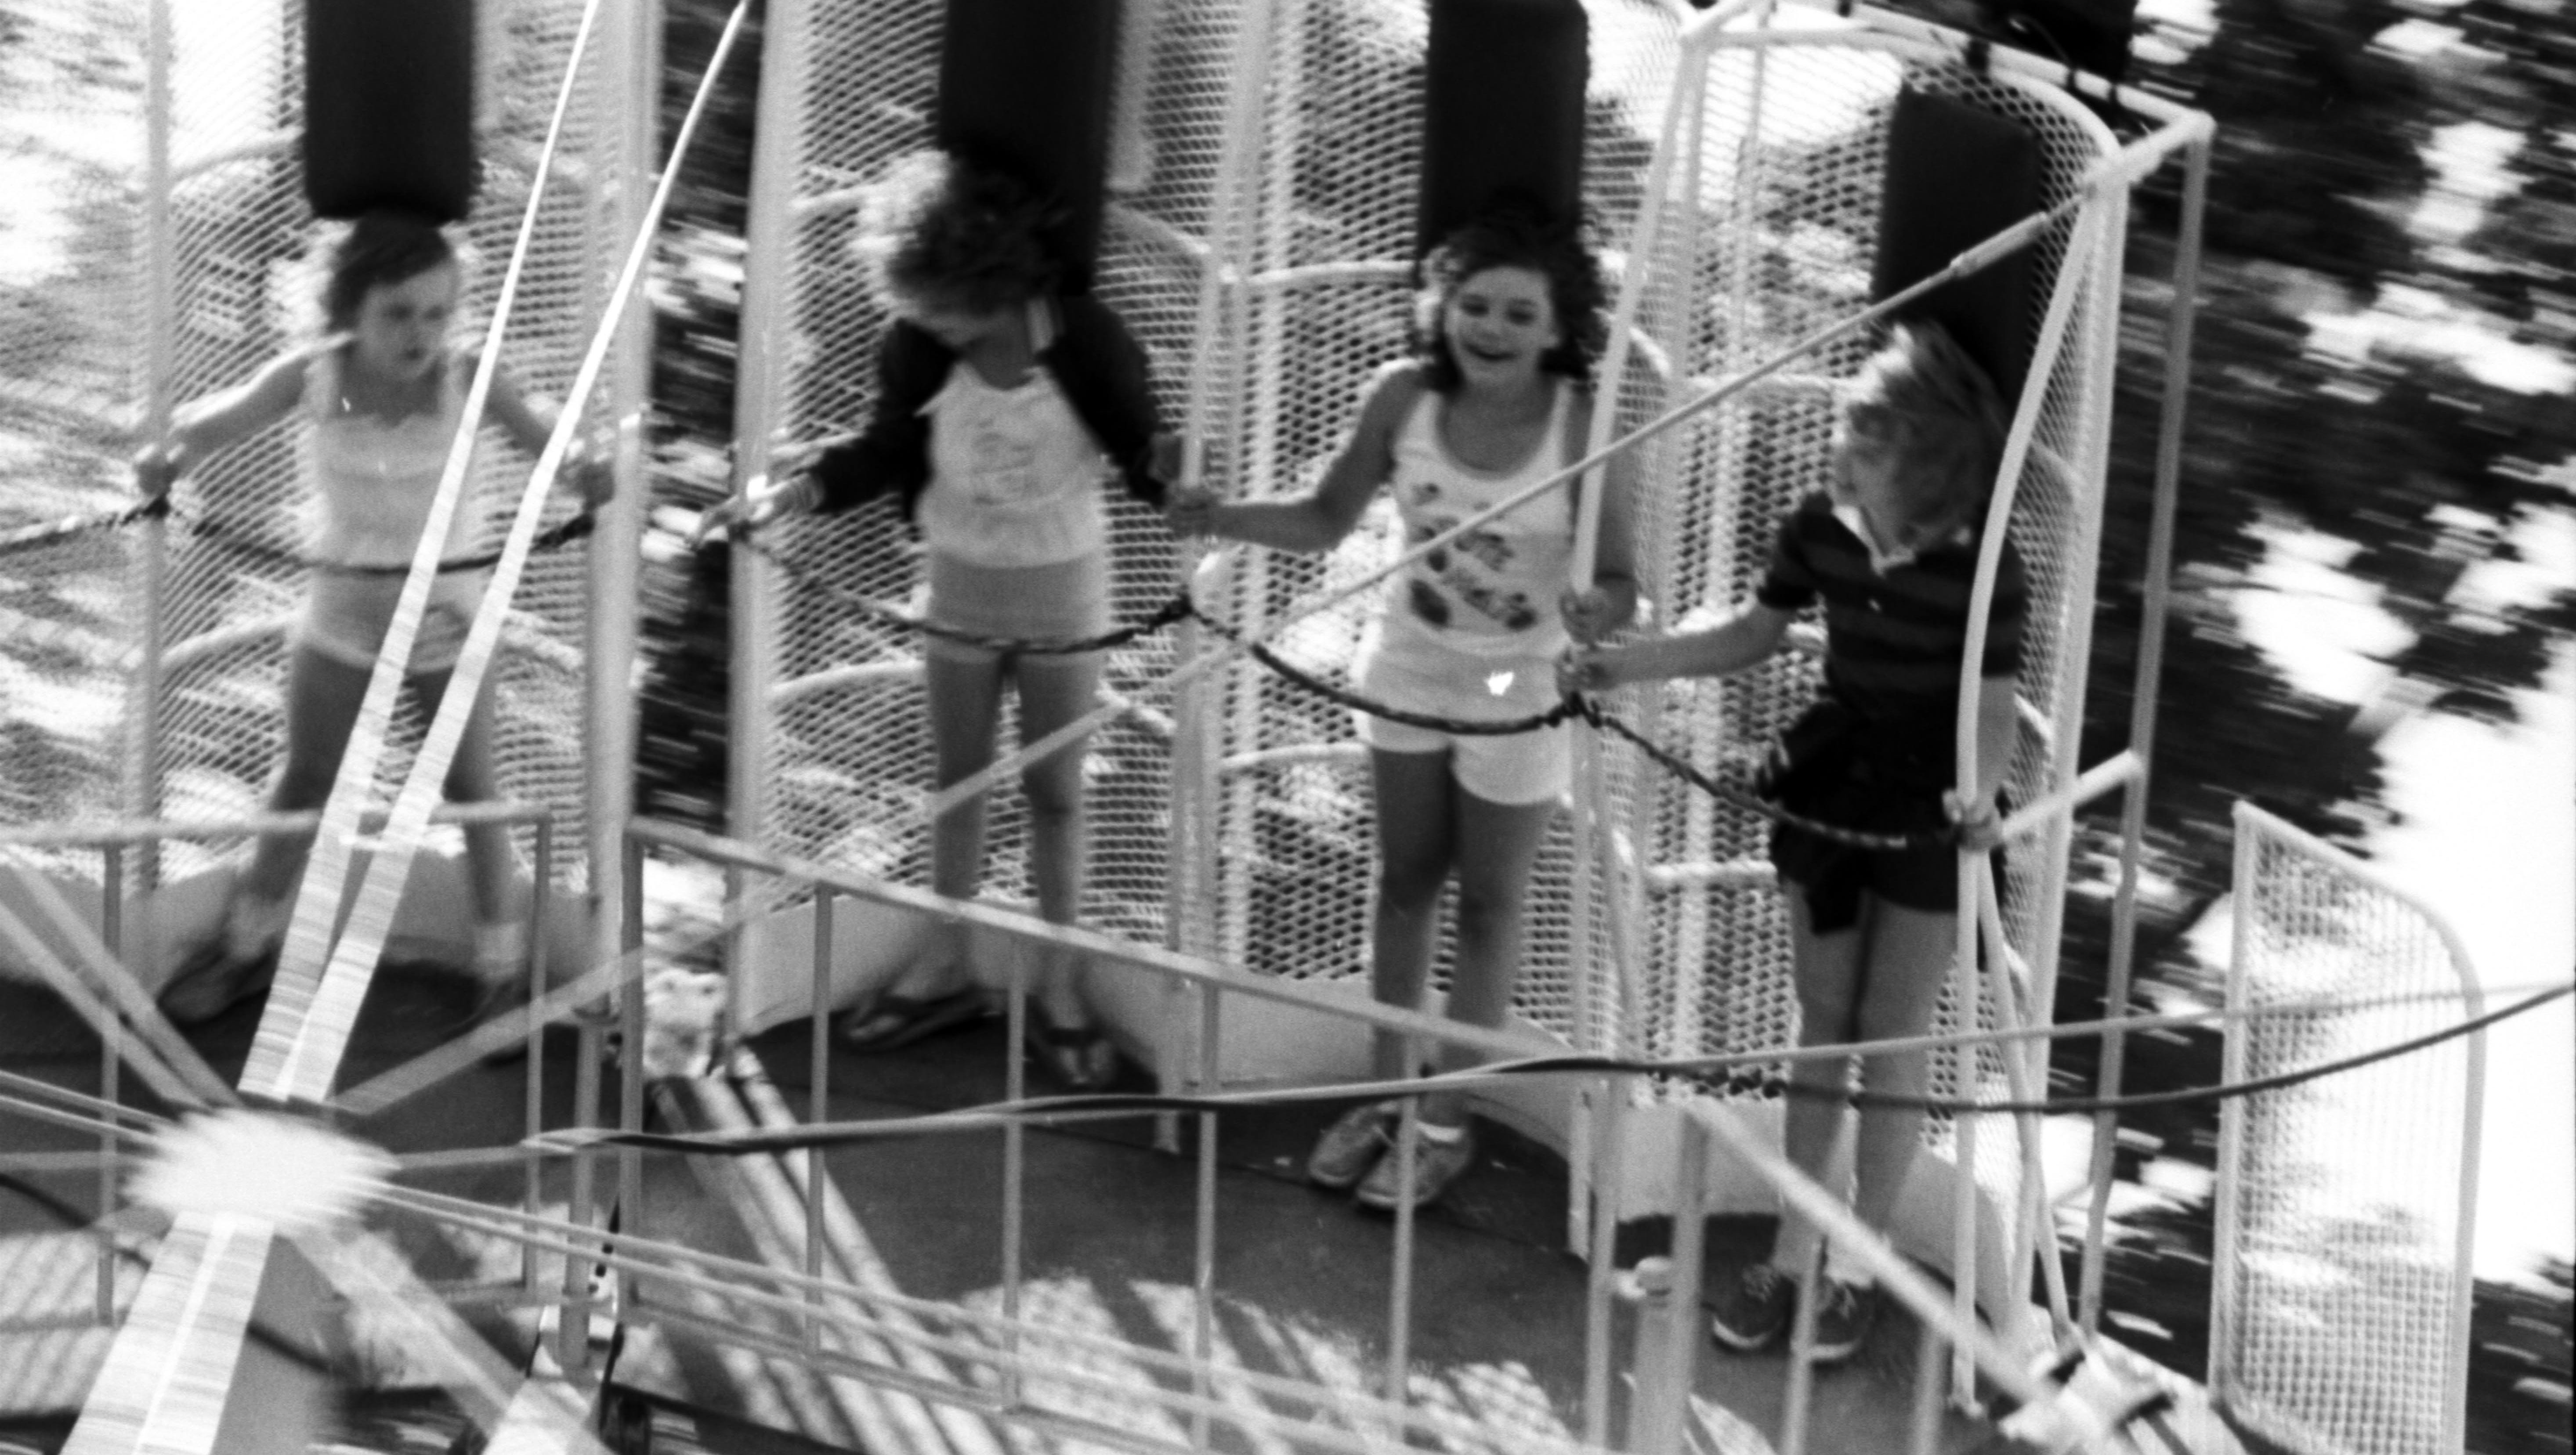 Children take a spin at the amusement park on Boblo Island in 1981.